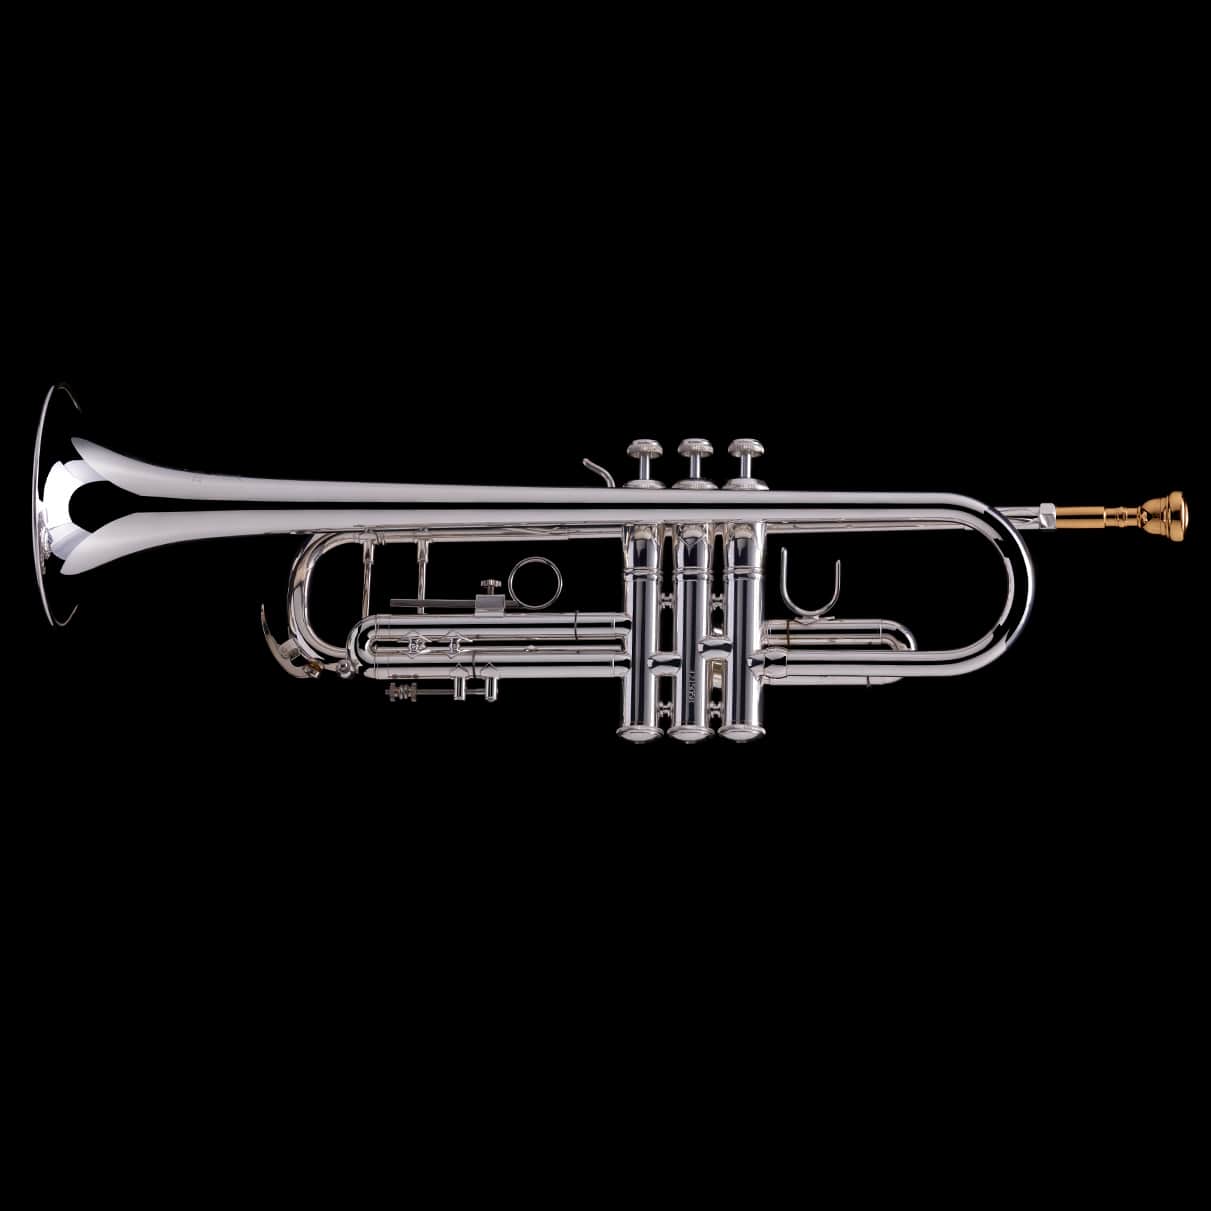 An image of a Bb Professional Trumpet in silver from Wessex Tubas, facing left